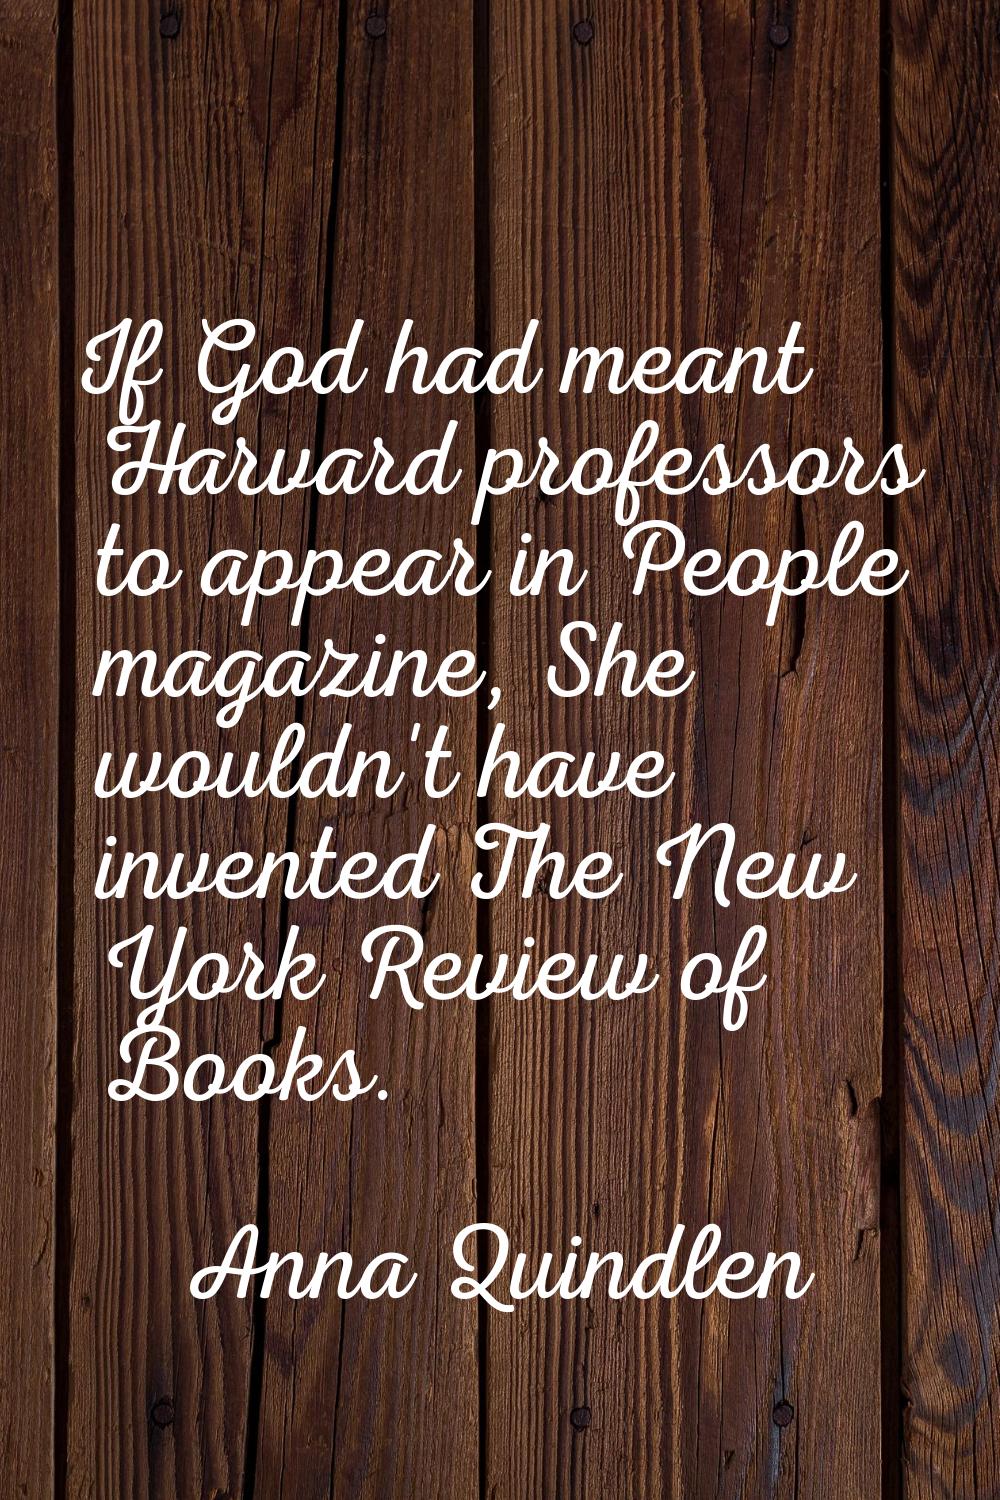 If God had meant Harvard professors to appear in People magazine, She wouldn't have invented The Ne